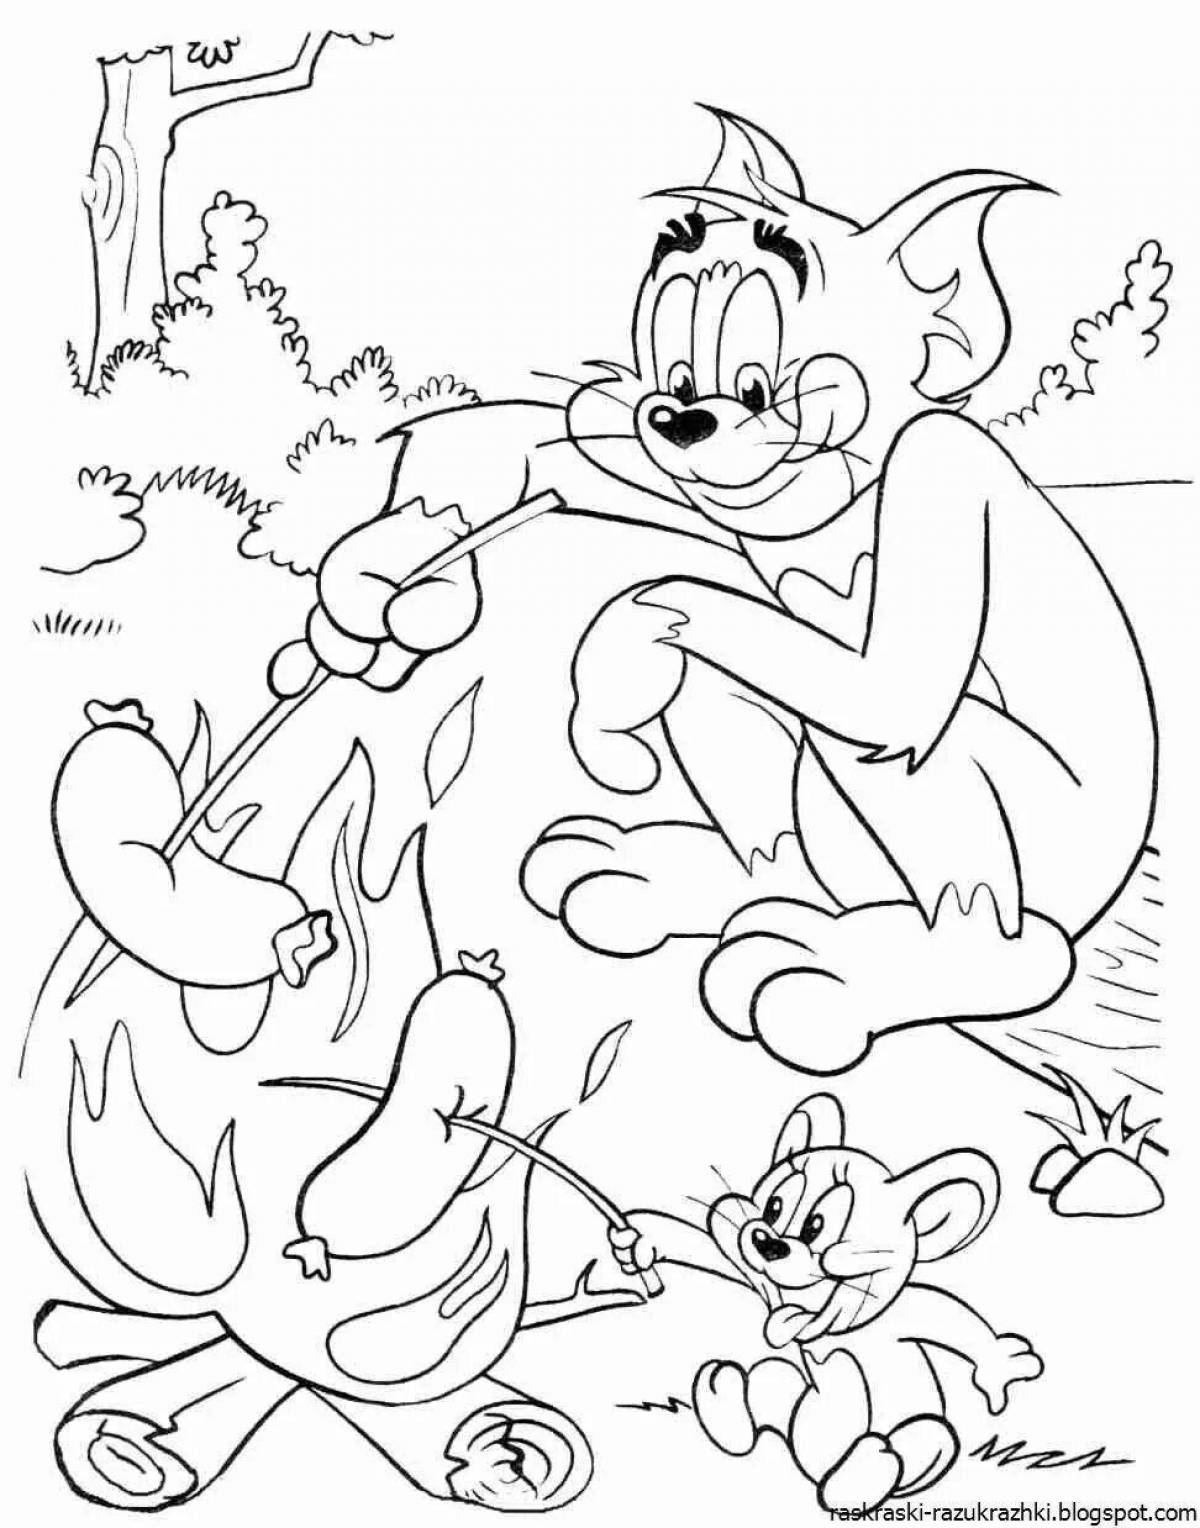 Exciting cartoon coloring book for kids